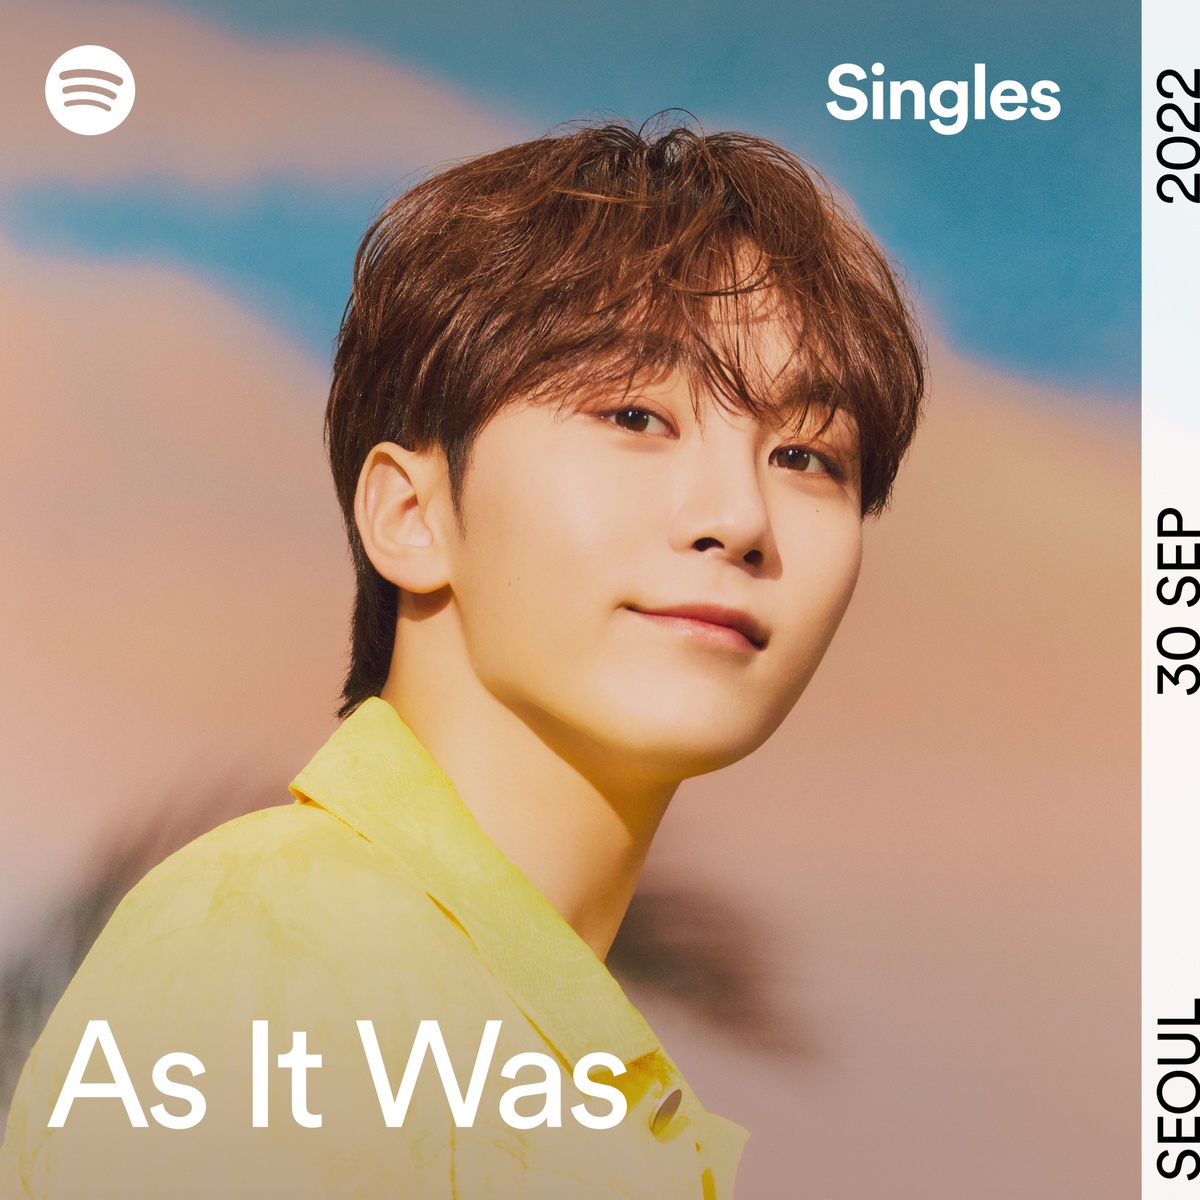 SEVENTEEN's SEUNGKWAN drops Spotify a cover of Harry Styles' 'As It Was'